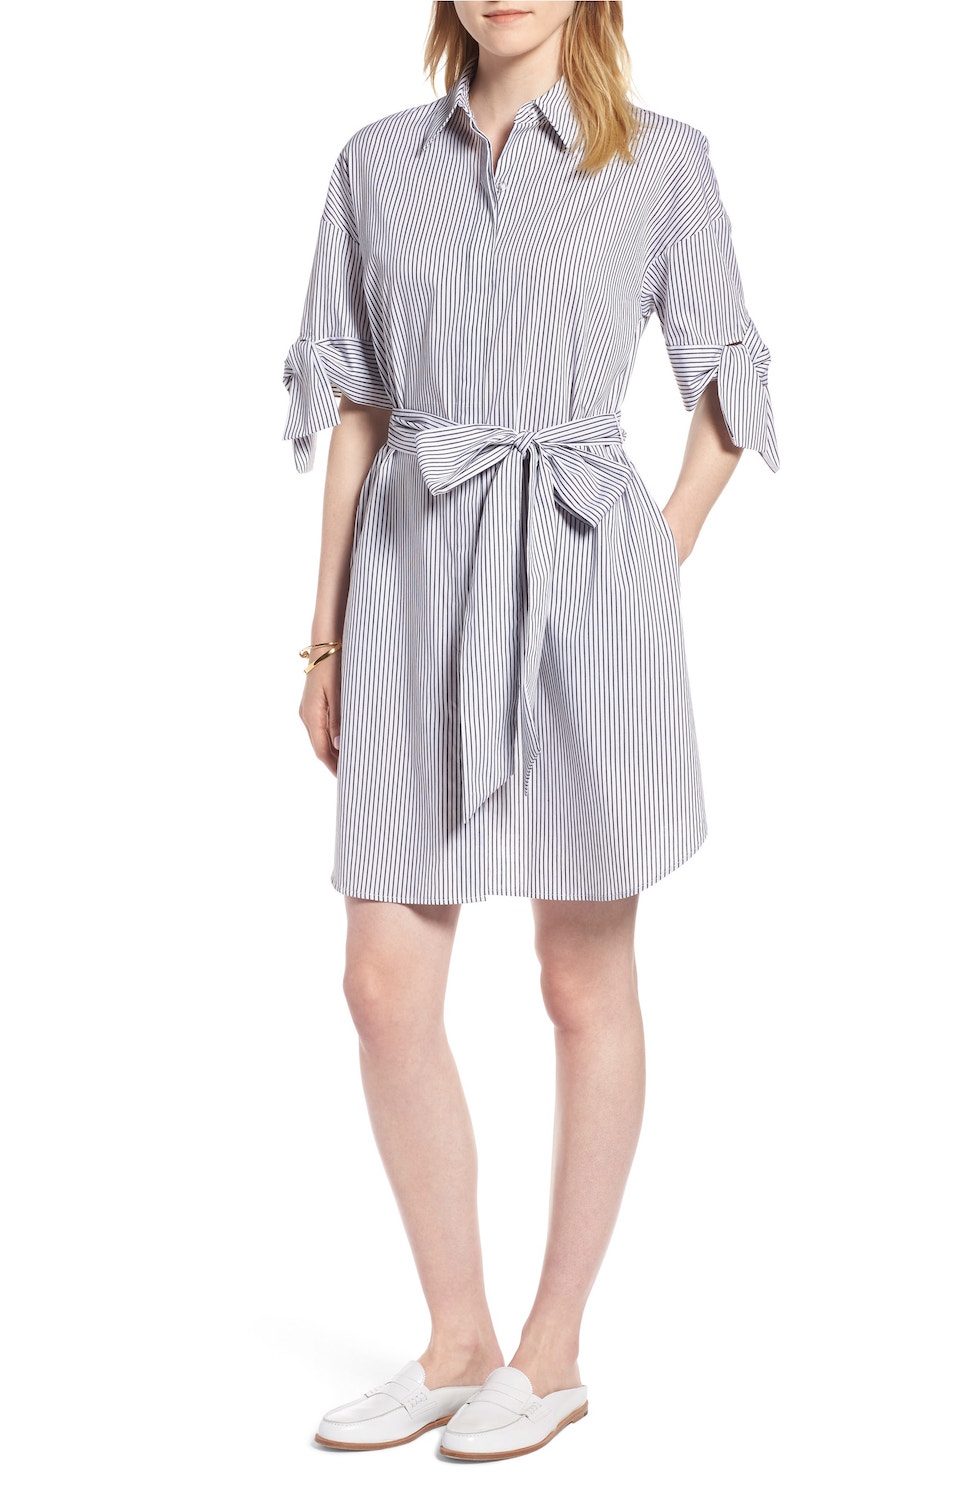 We Love This Shirtdress From the Nordstrom Anniversary Sale 2018 | UsWeekly